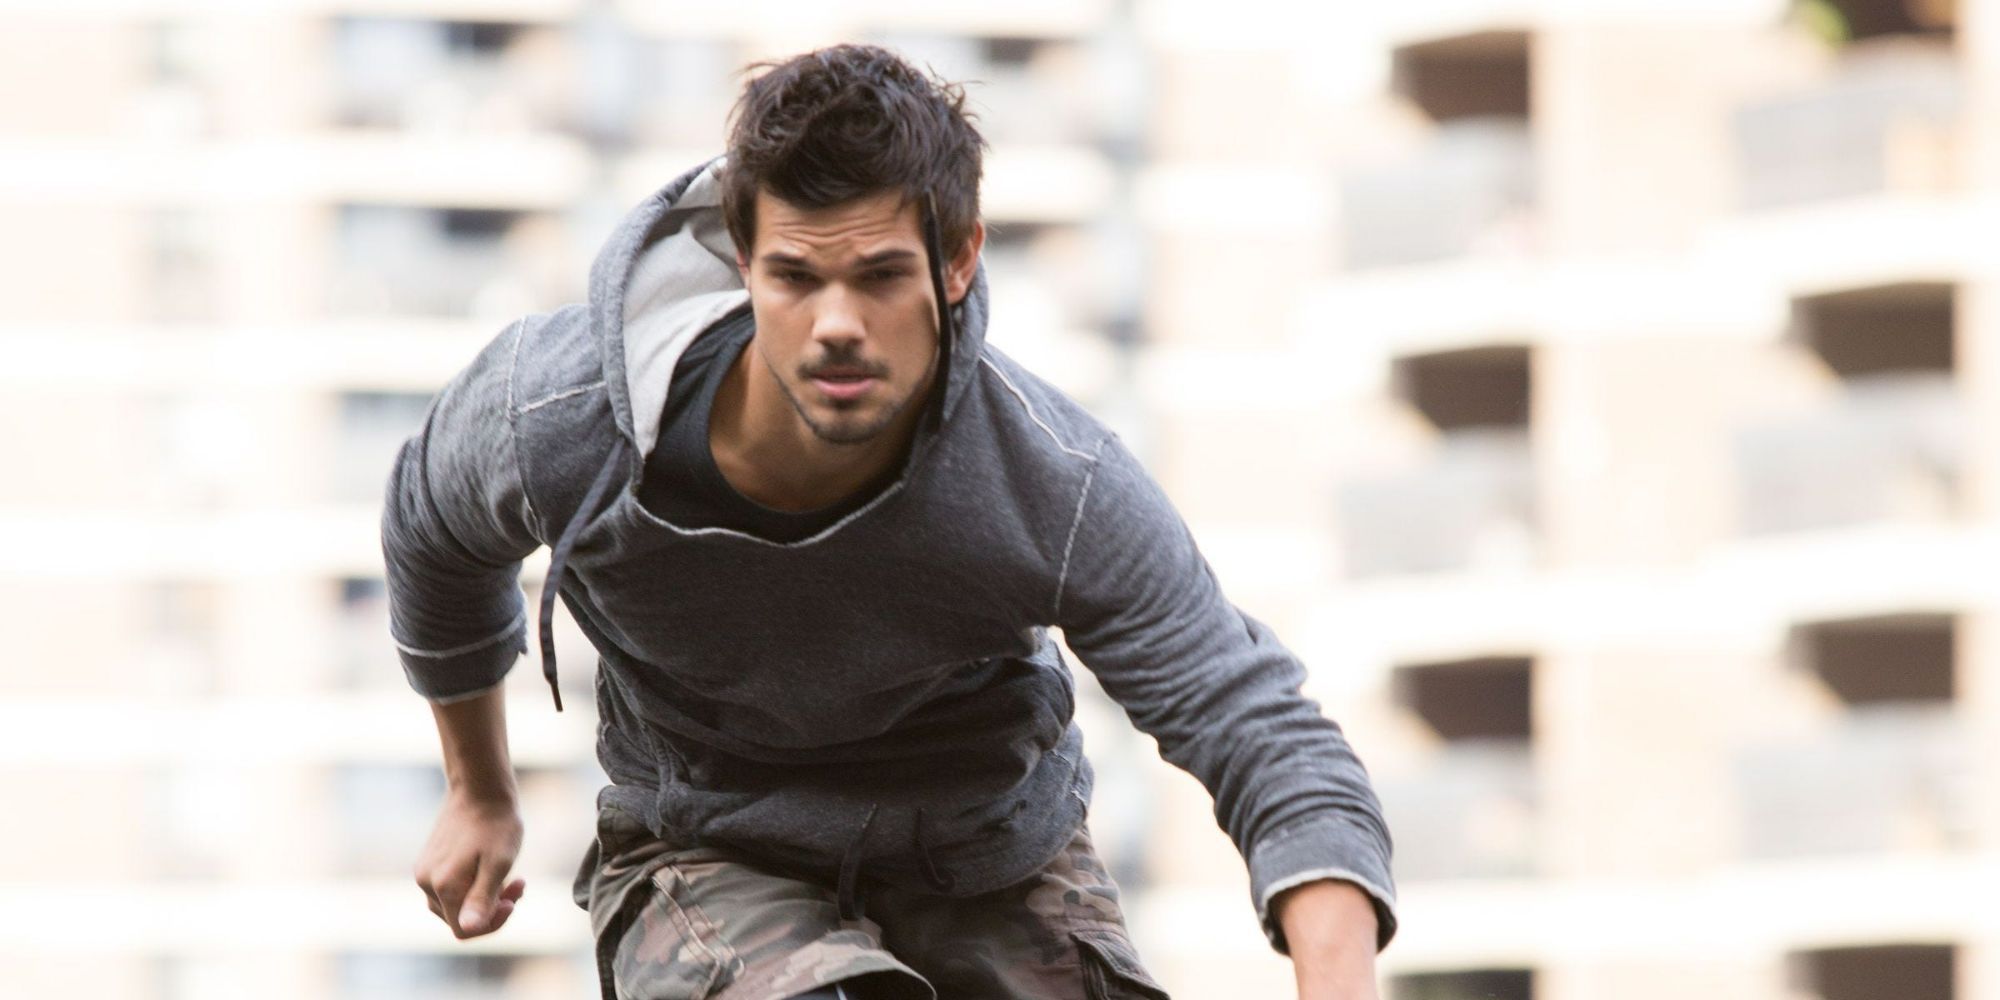 The protagonist of Tracers runs through the city